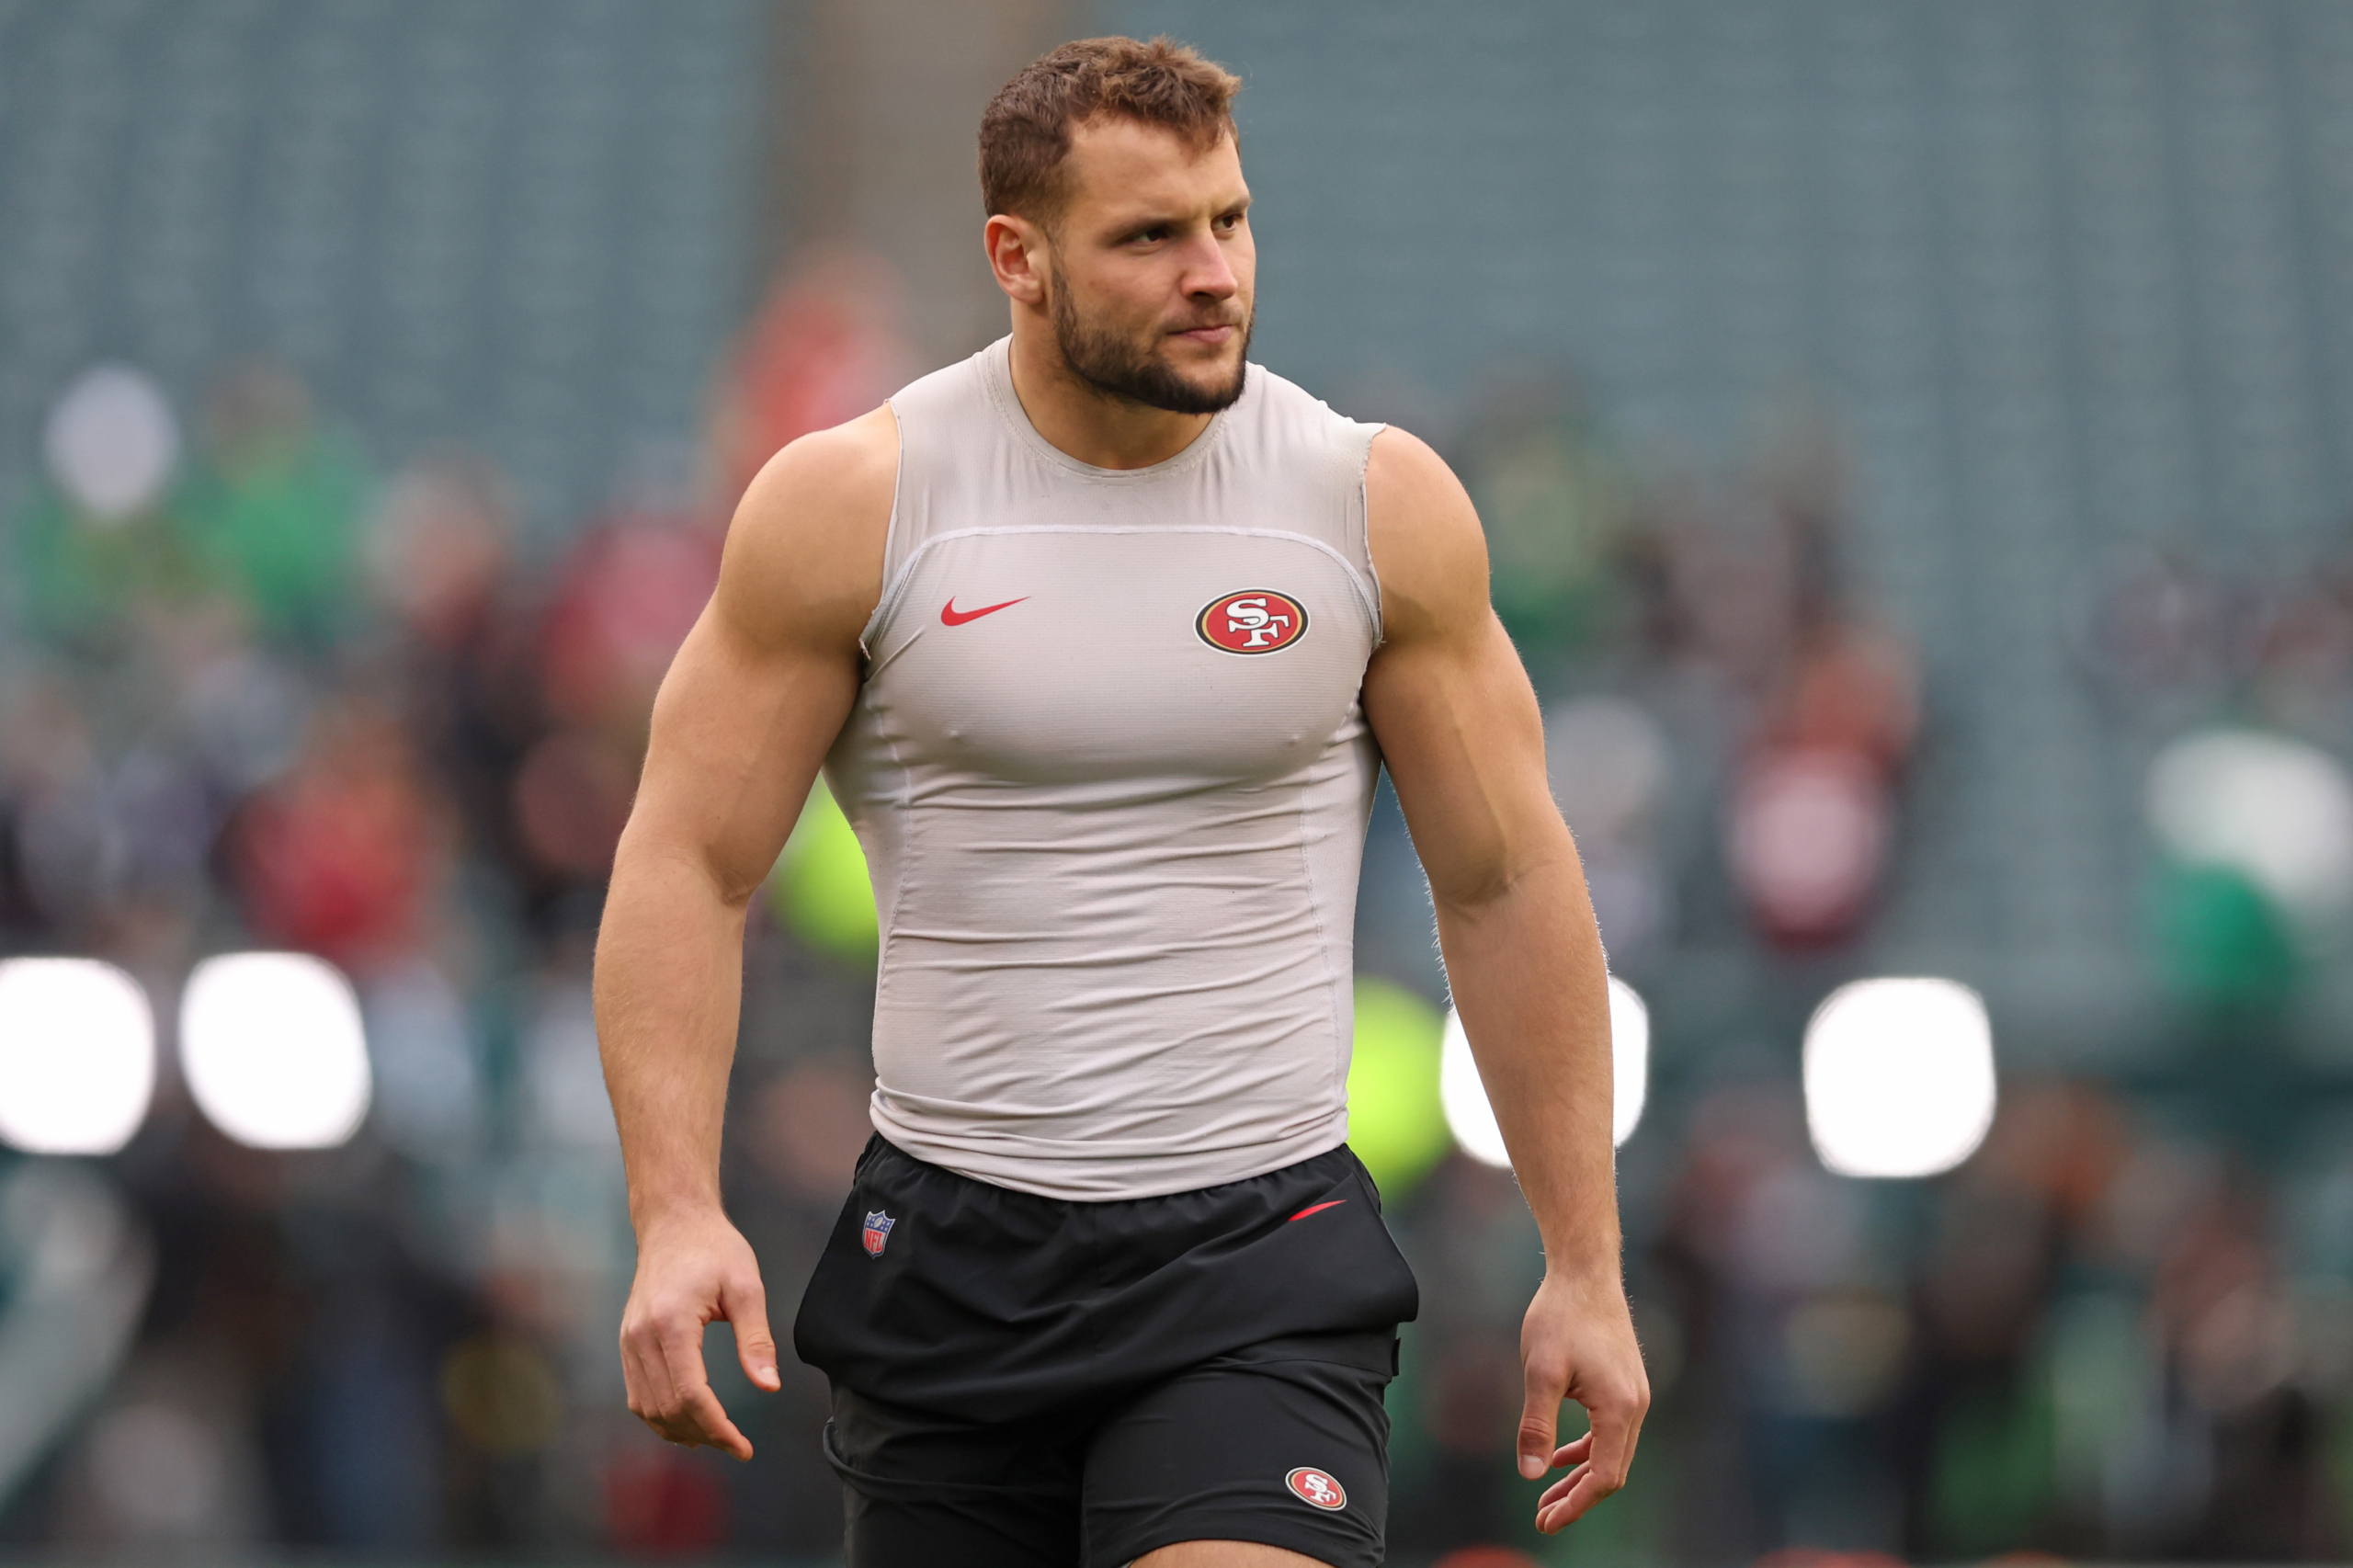 Nick Bosa lands record-breaking $170 million contract with the San Francisco 49ers